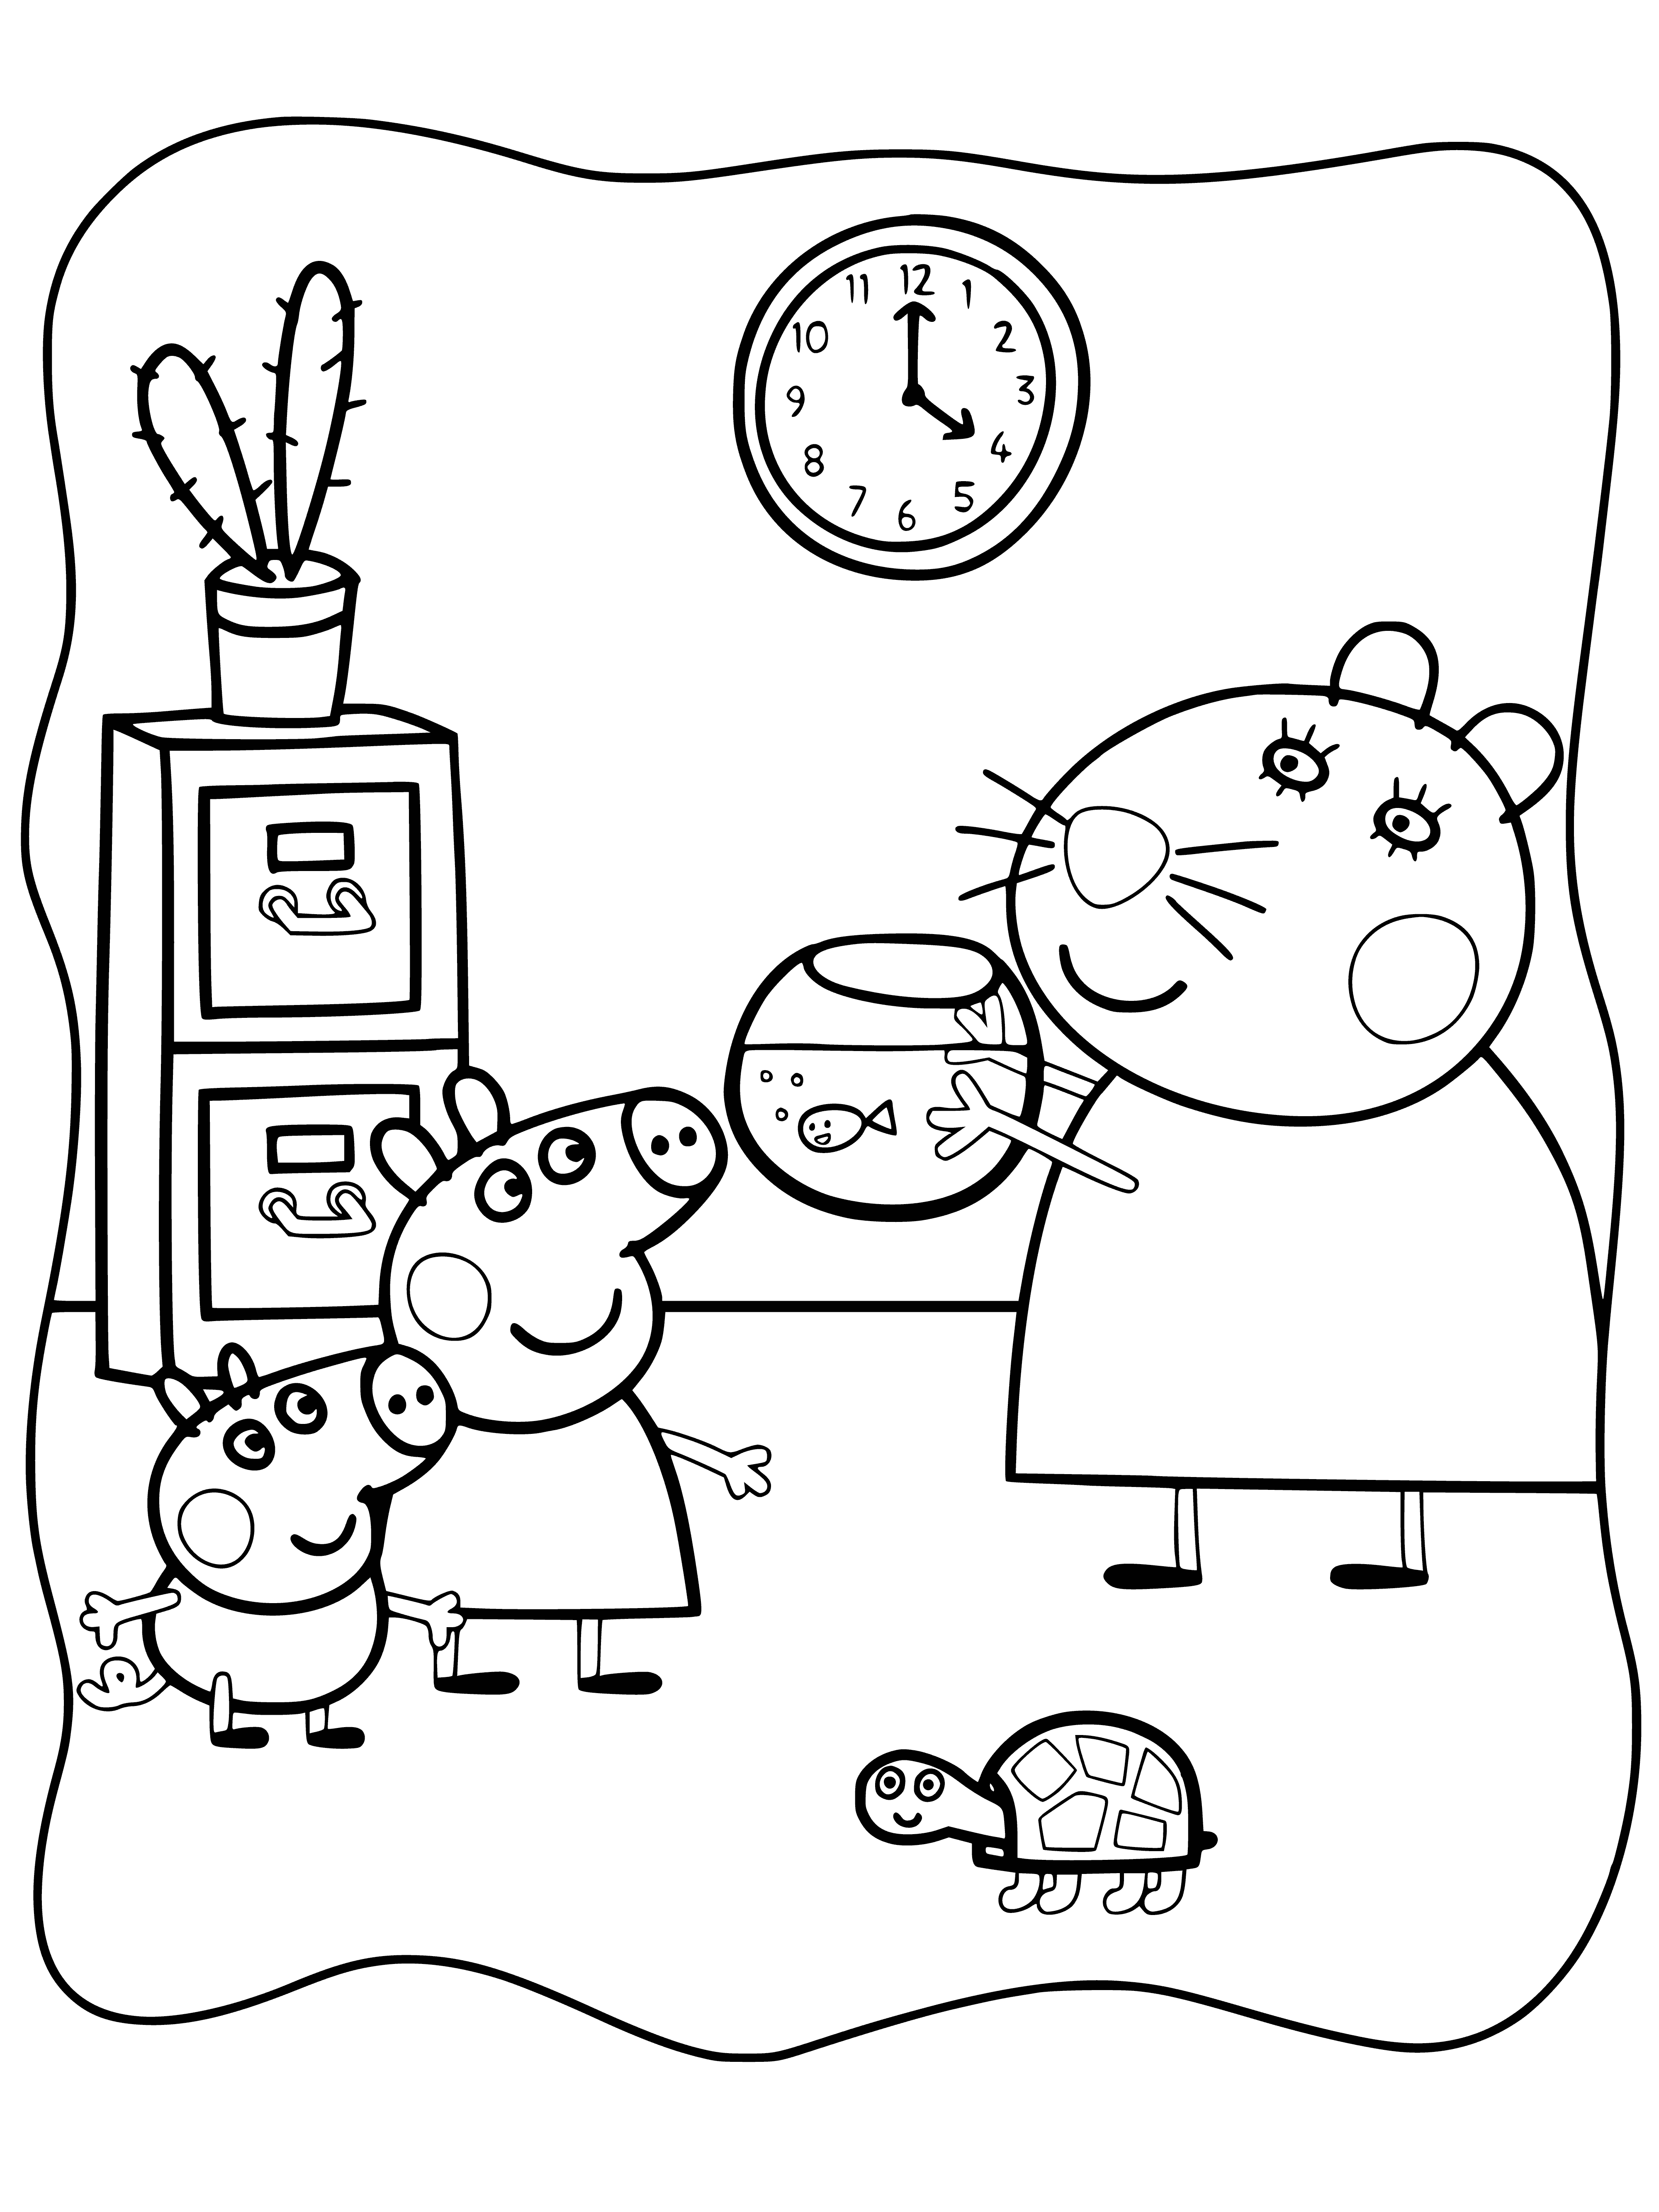 Dr. Hamster coloring page